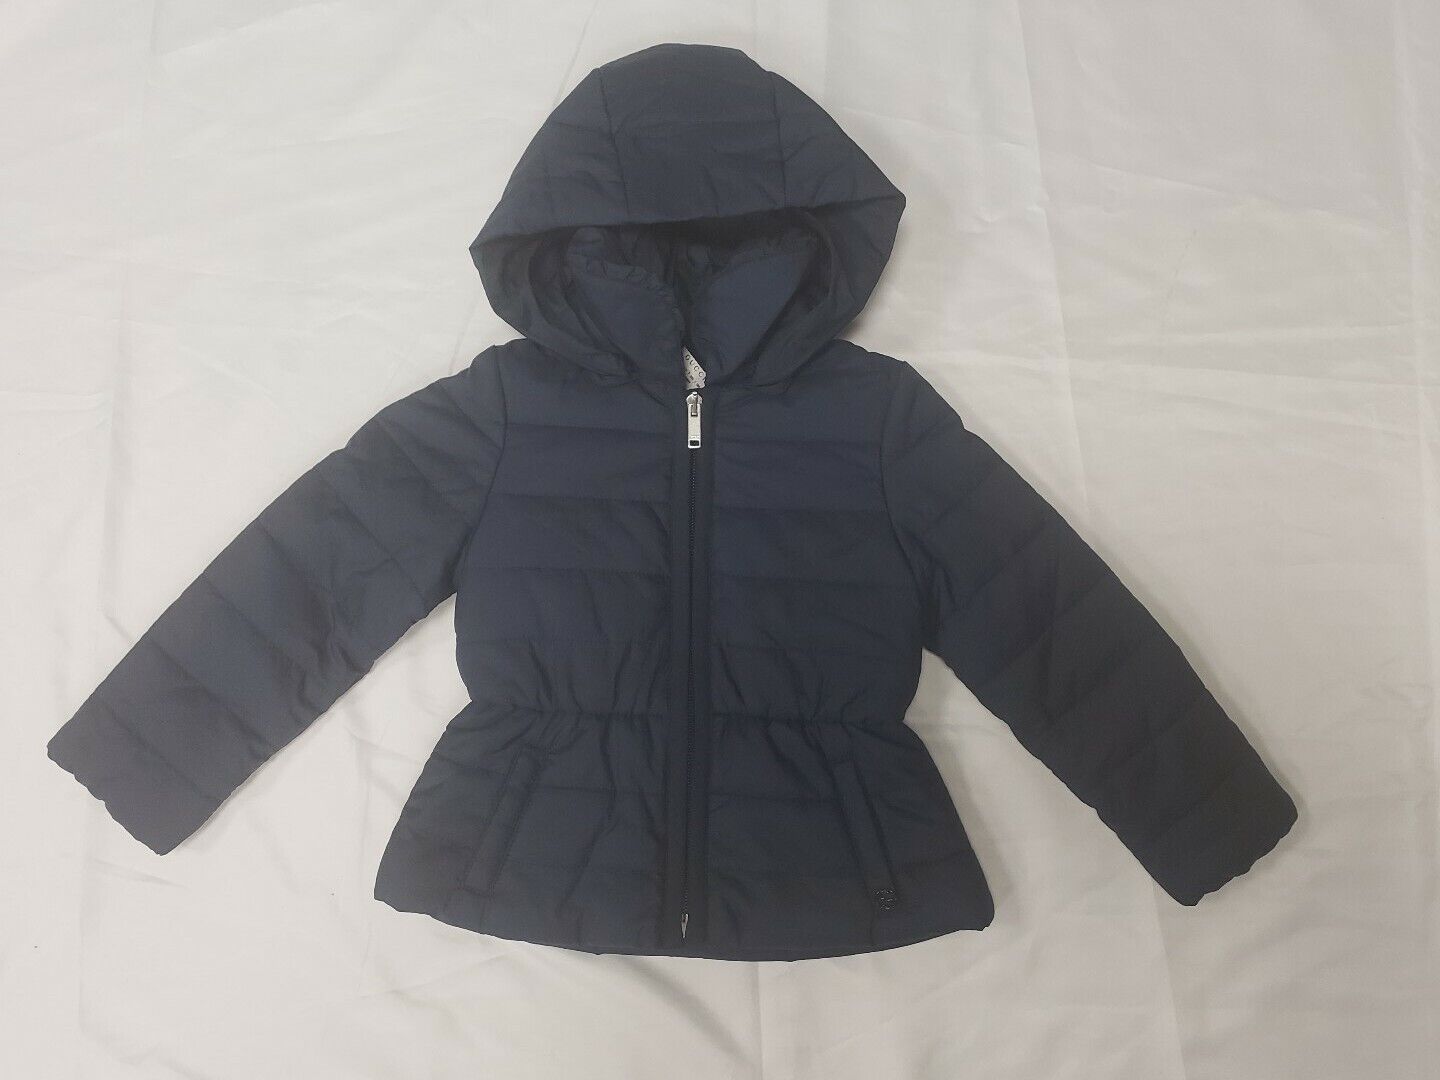 NWT NEW Gucci baby girls navy blue peplum jacket with pouch 12/18m 18/24m 334978 Populaire SALE, klassiek